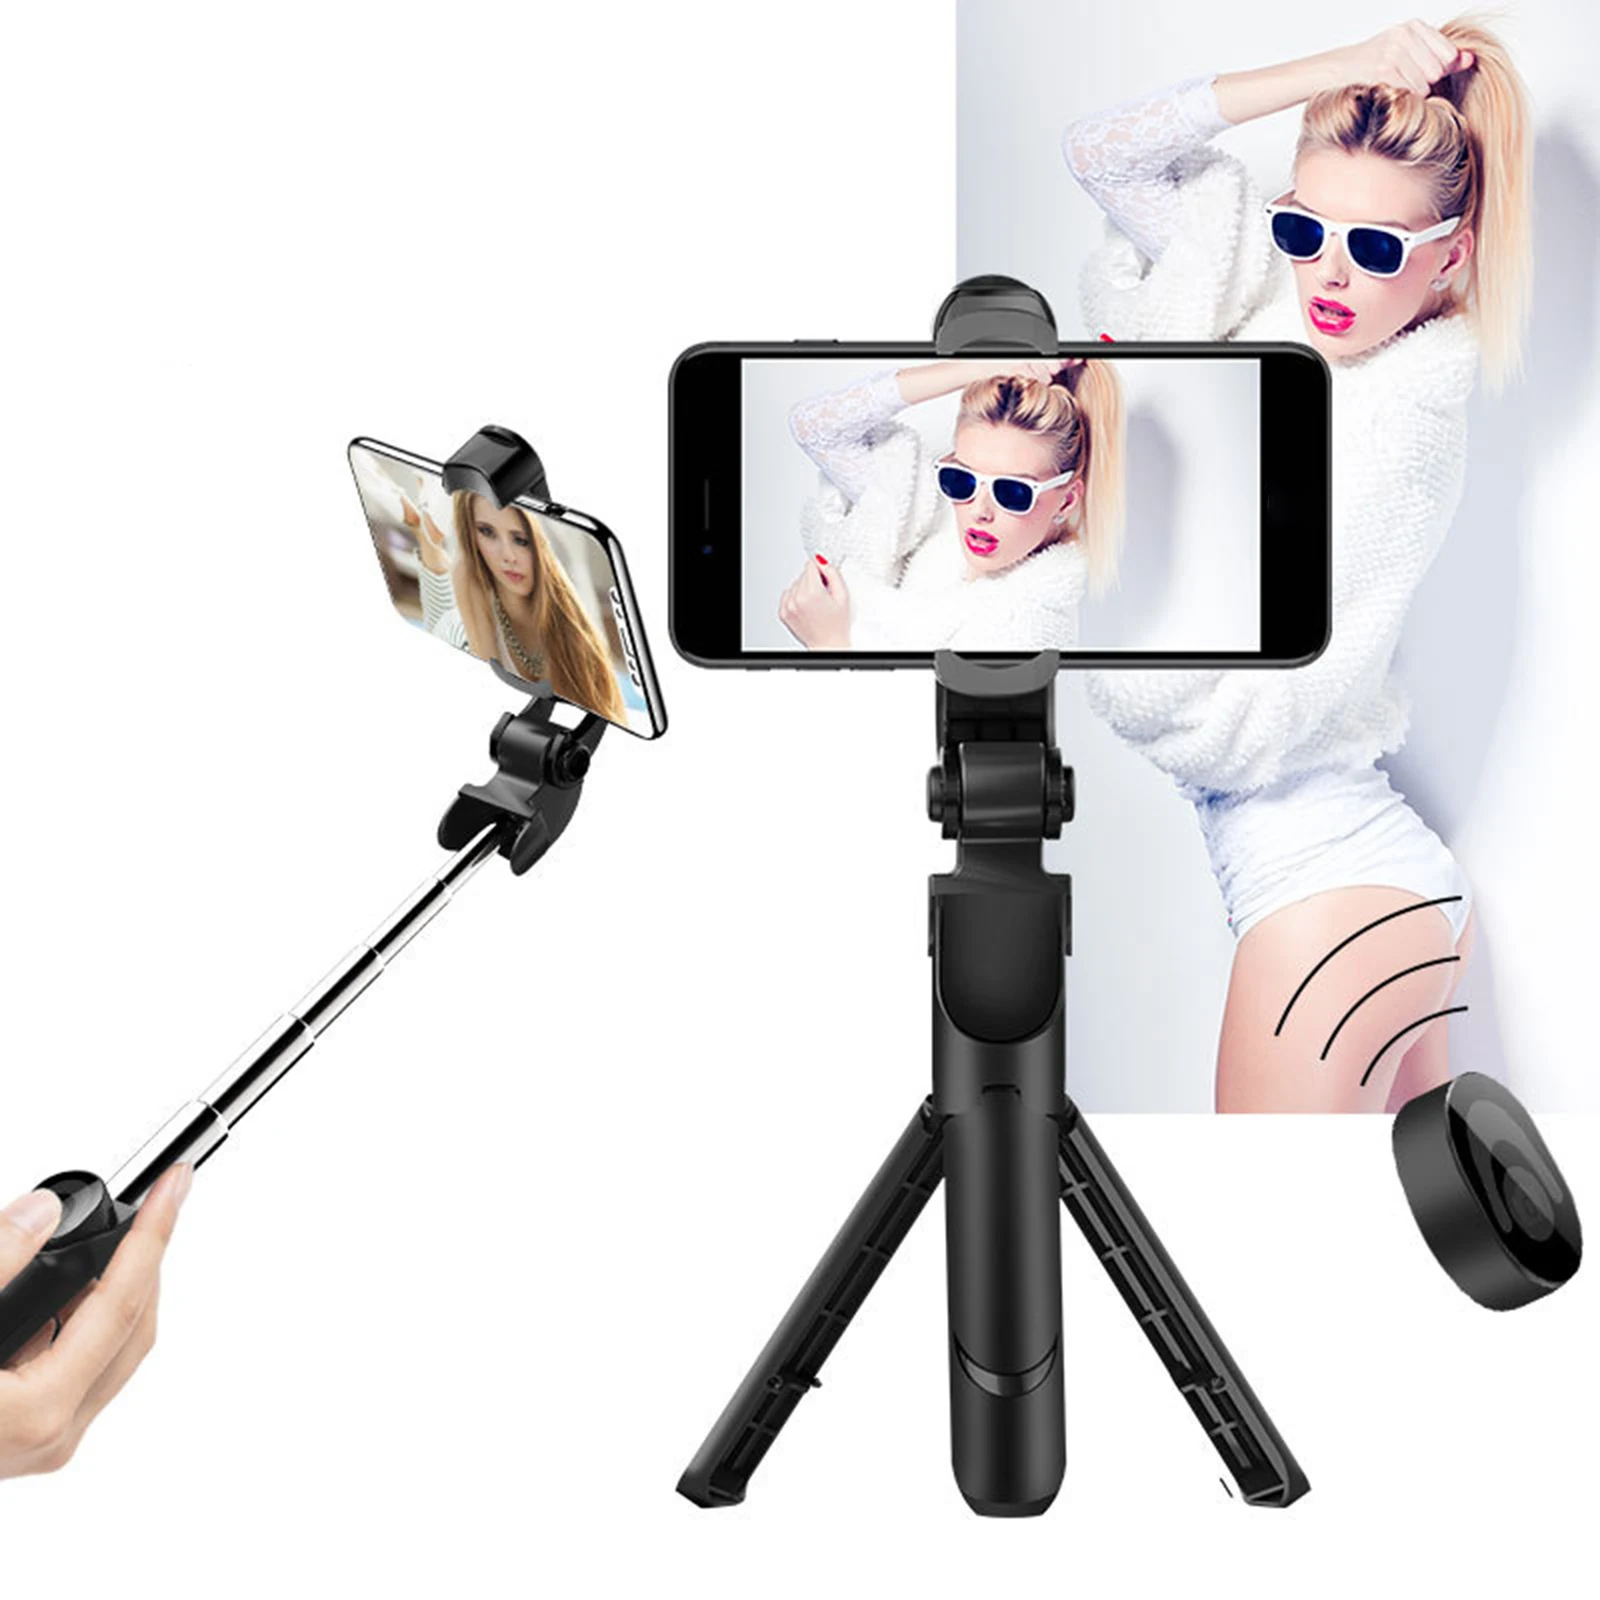 Enlarge Selfie Stick Phone Tripod Extendable Monopod With Bluetooth Remote 3 In 1 Phone Tripod For Smartphone Selfie Stick